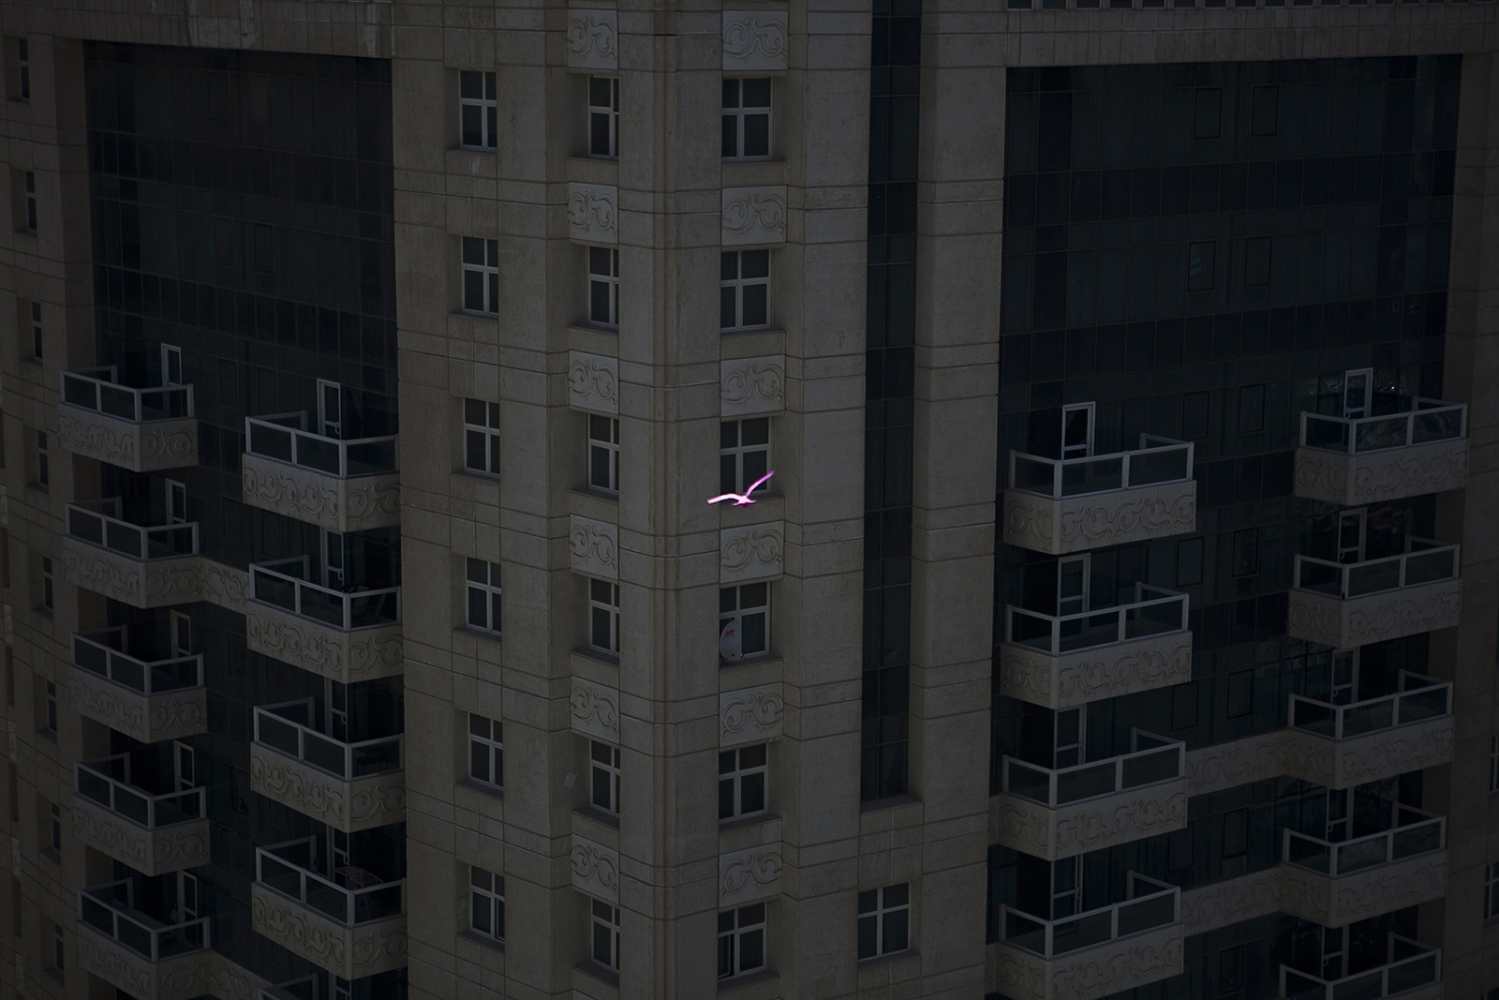  DOHA, QATAR- 20 FEBRUARY 2014 A pink coloured pigeon flies between buildings. Photo by Natalie Naccache/Getty Image Reportage/ Magnum Foundation/Prince Claus Fund/ AFAC 